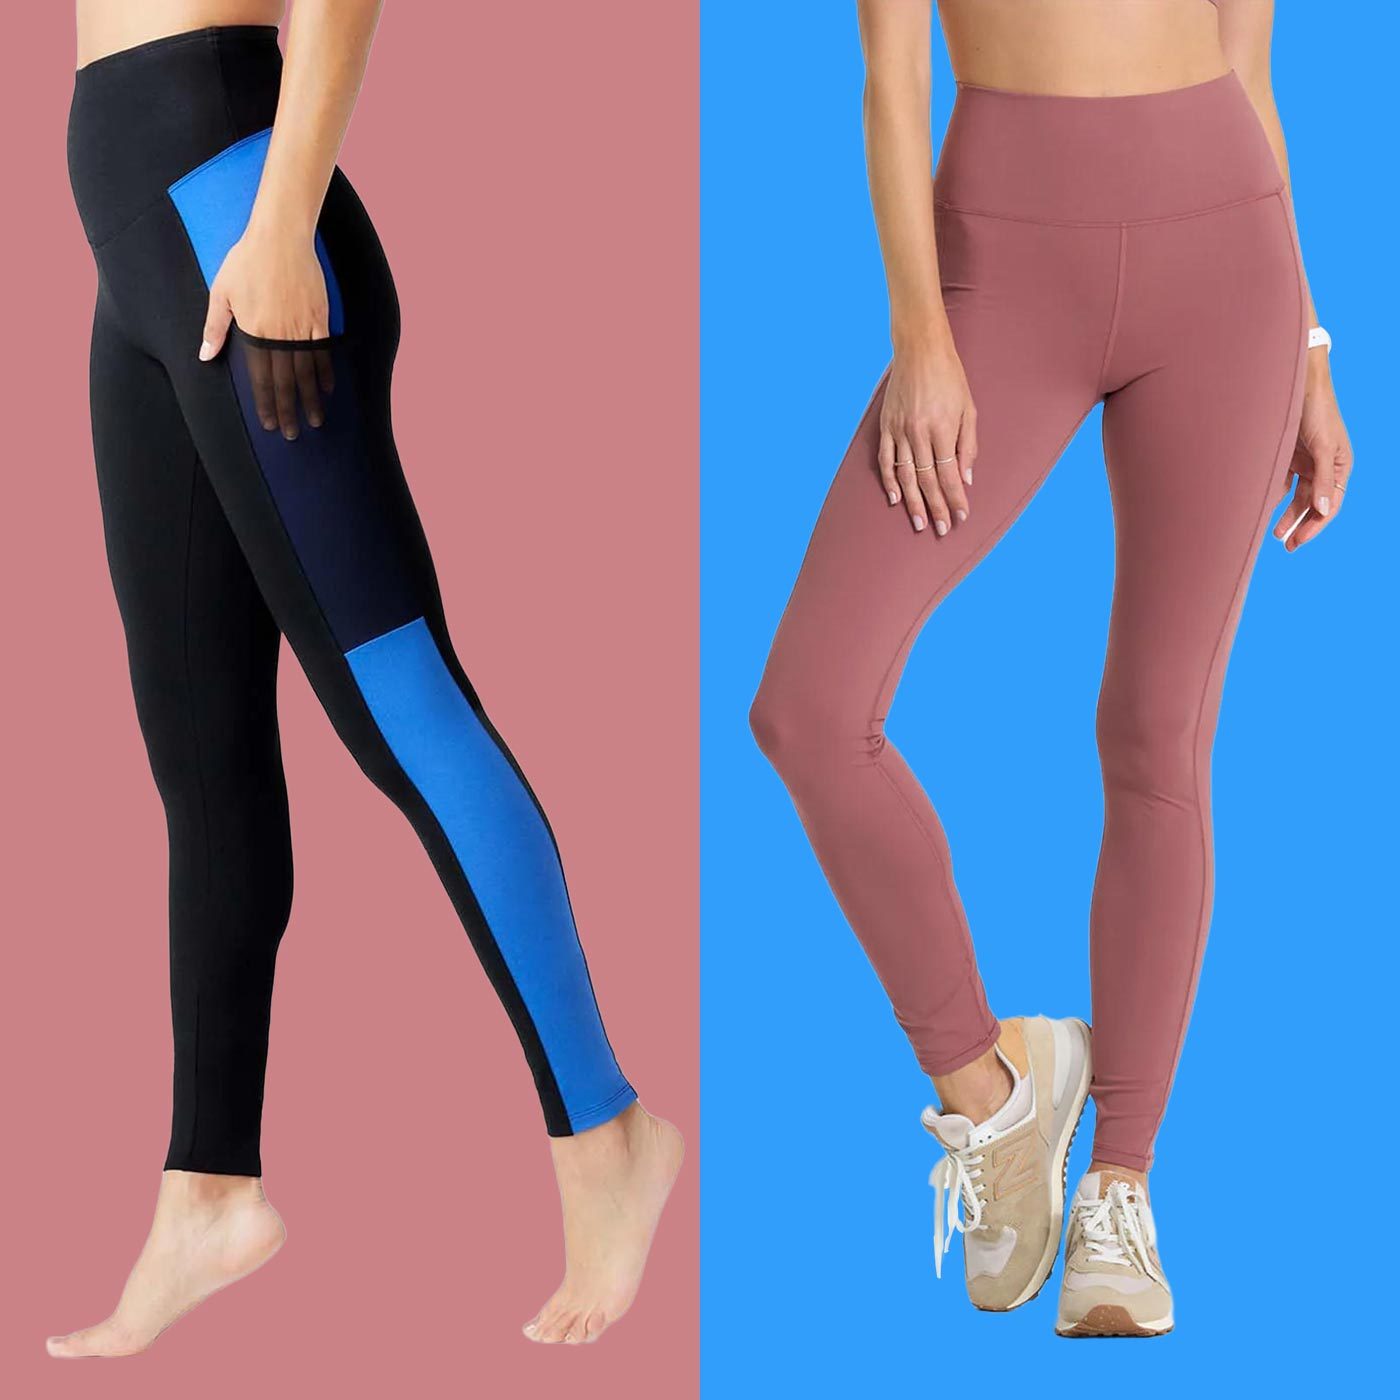 https://www.rd.com/wp-content/uploads/2023/02/12-Leggings-With-Pockets-to-Hold-All-of-Your-Things_FT-1.jpg